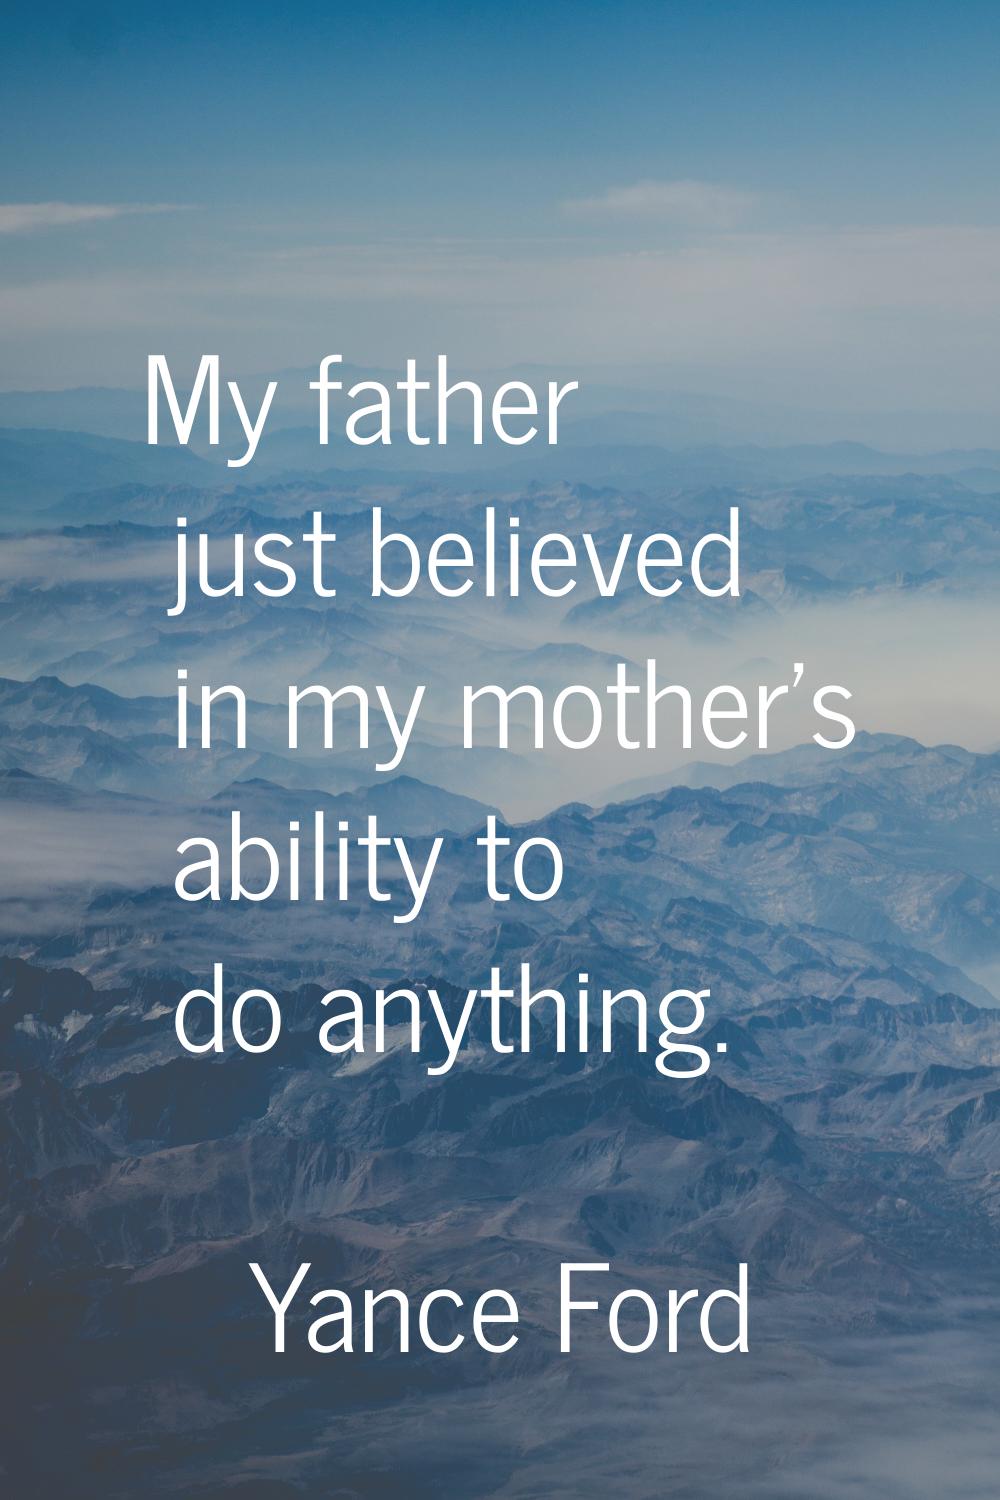 My father just believed in my mother's ability to do anything.